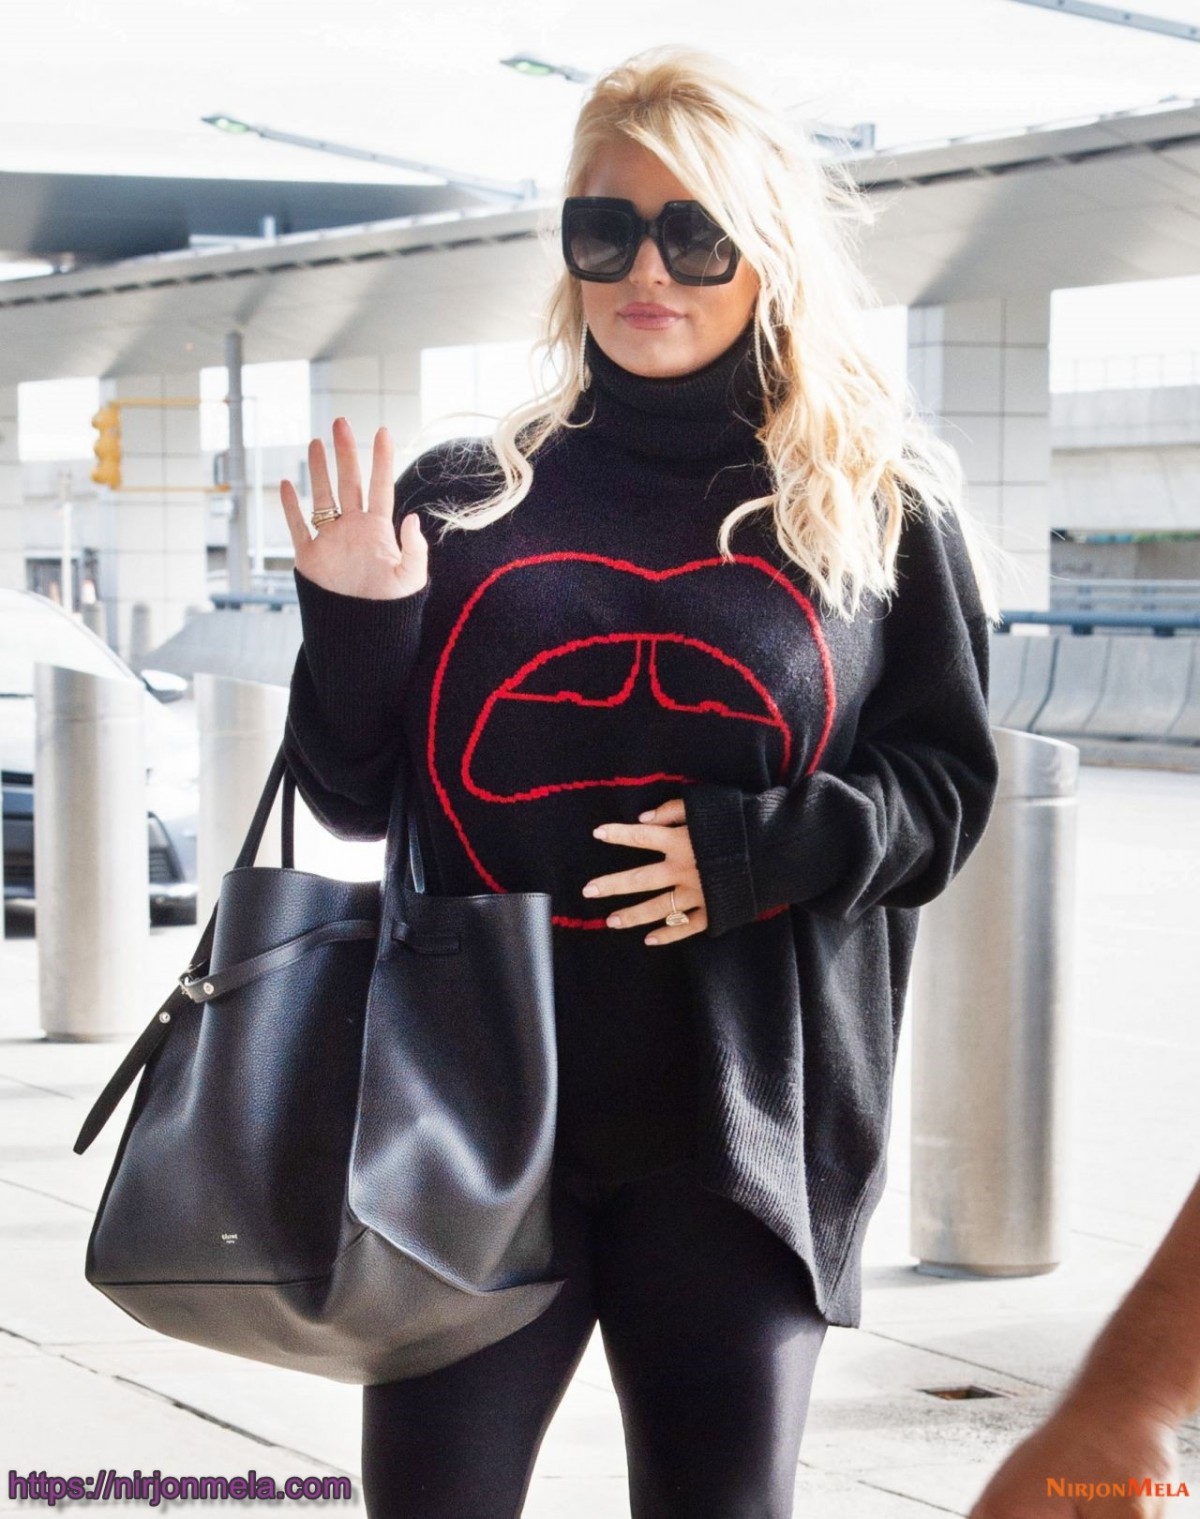 jessica-simpson-arrives-at-jfk-airport-in-nyc-10-12-2018-0.jpg